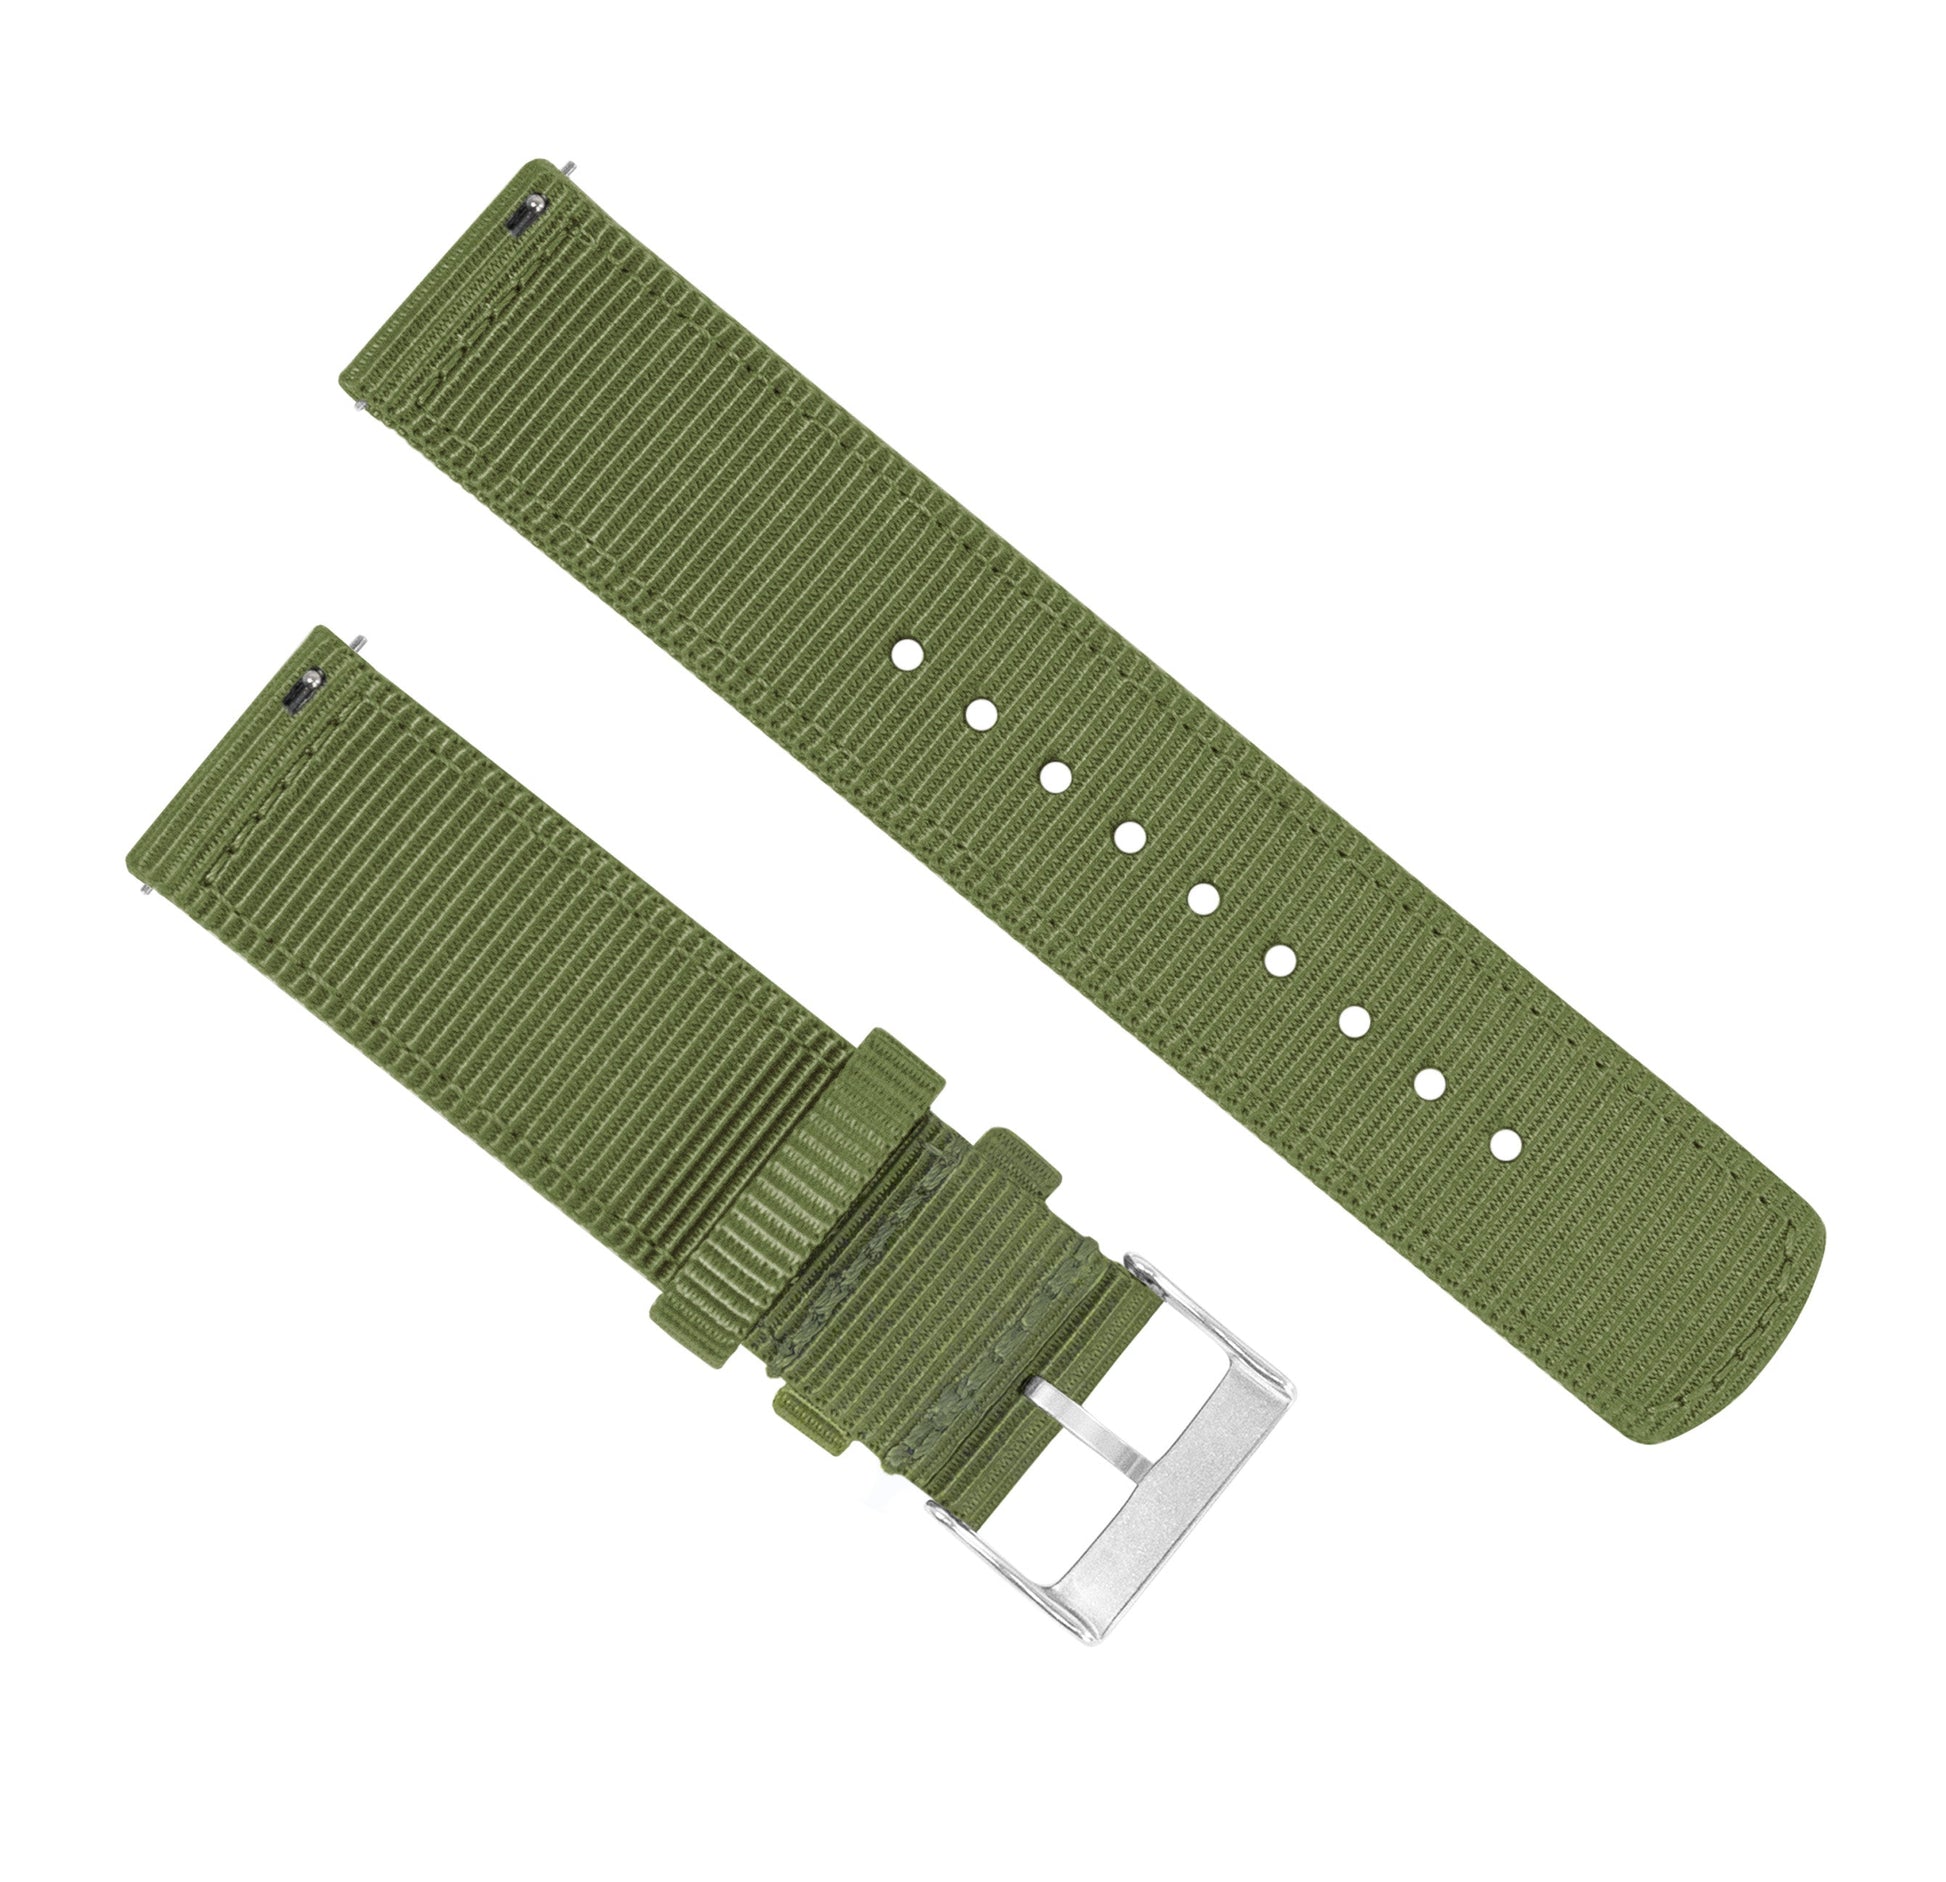 MOONSWATCH Bip | Two-Piece NATO Style | Army Green - Barton Watch Bands